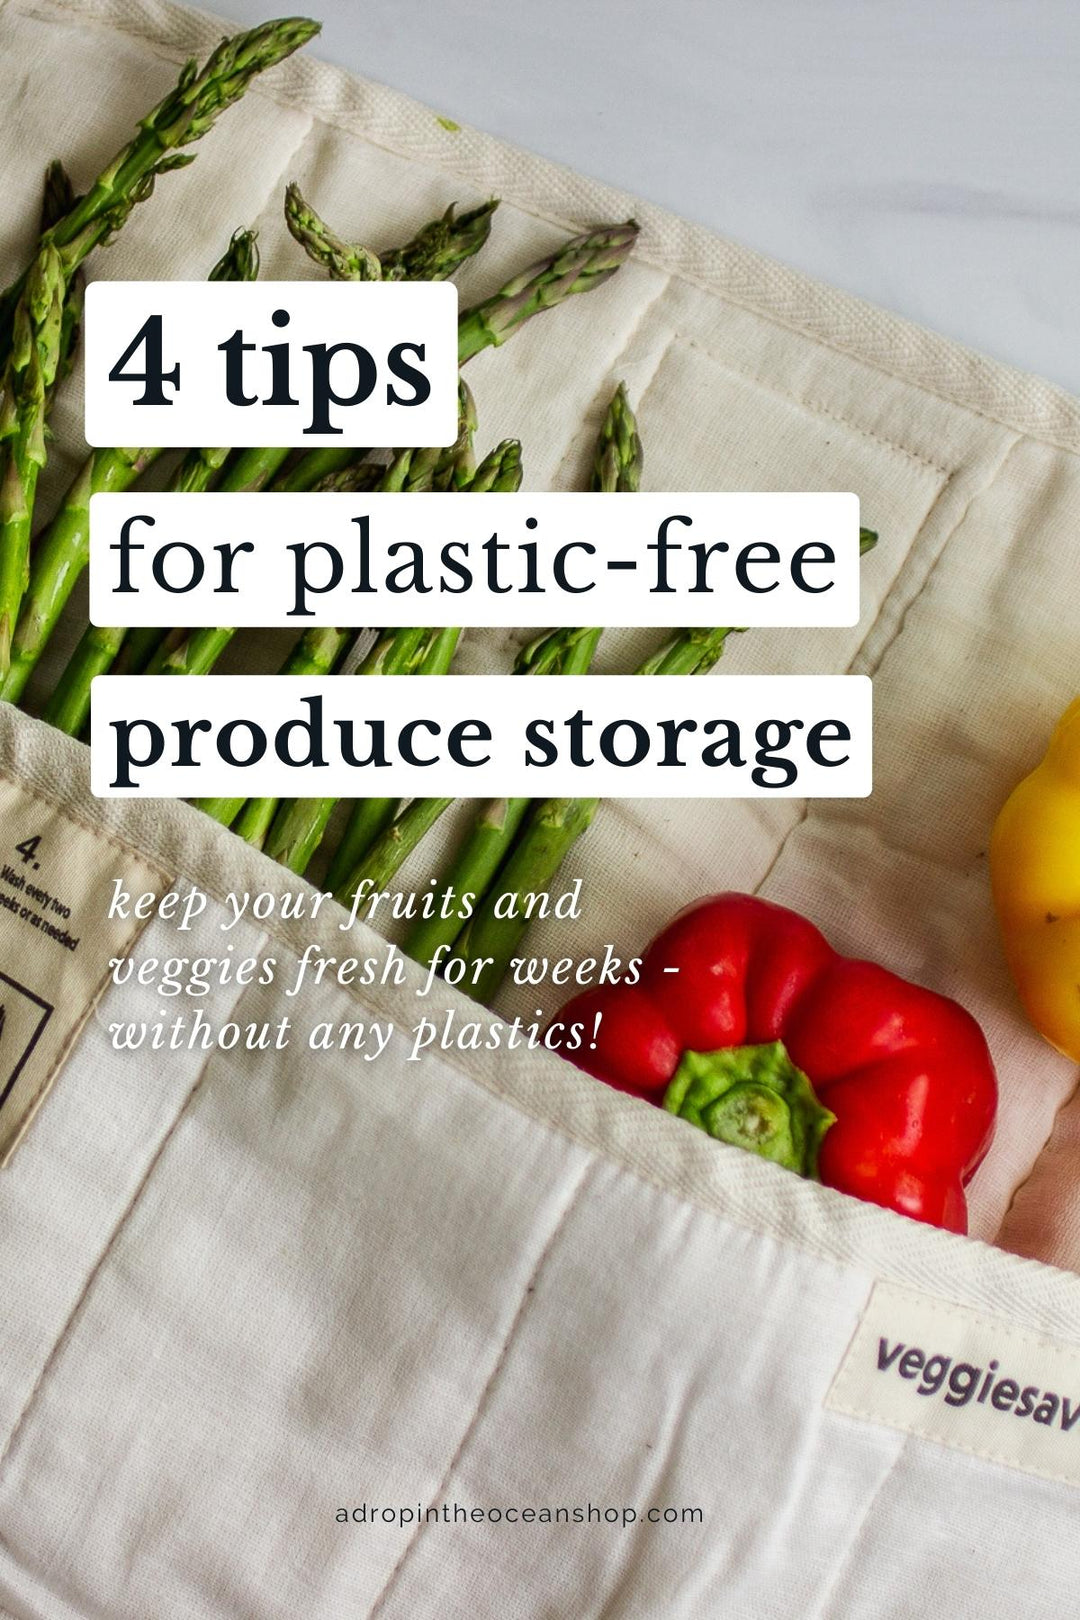 A Drop in the Ocean Online Zero Waste Store How to Store Produce Without Plastic